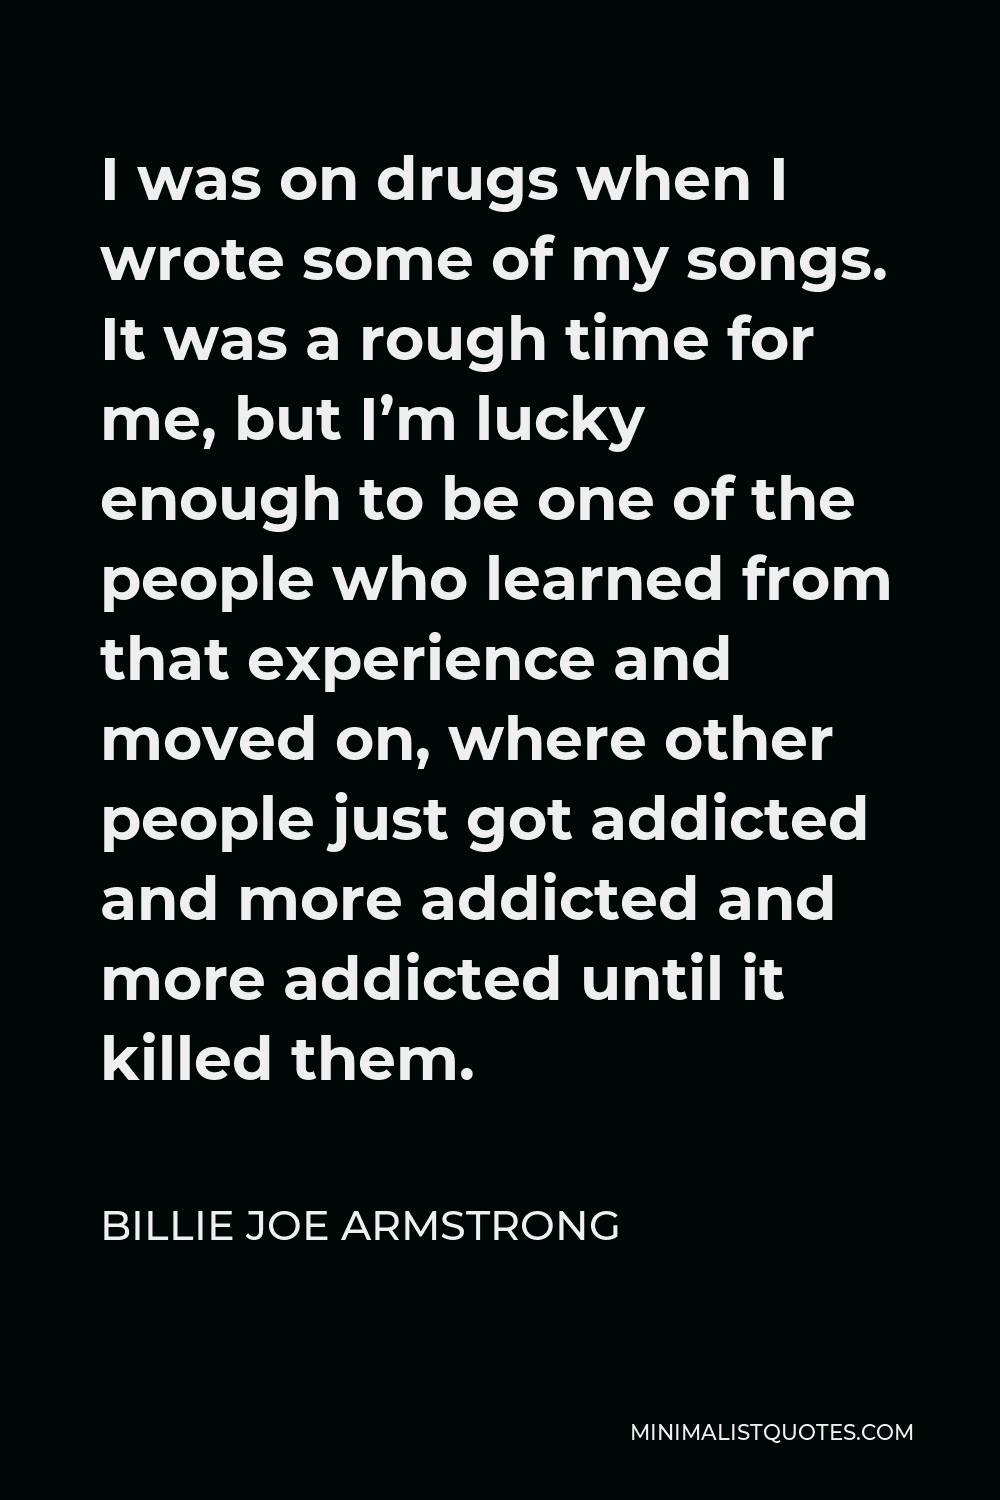 Billie Joe Armstrong Quote - I was on drugs when I wrote some of my songs. It was a rough time for me, but I’m lucky enough to be one of the people who learned from that experience and moved on, where other people just got addicted and more addicted and more addicted until it killed them.